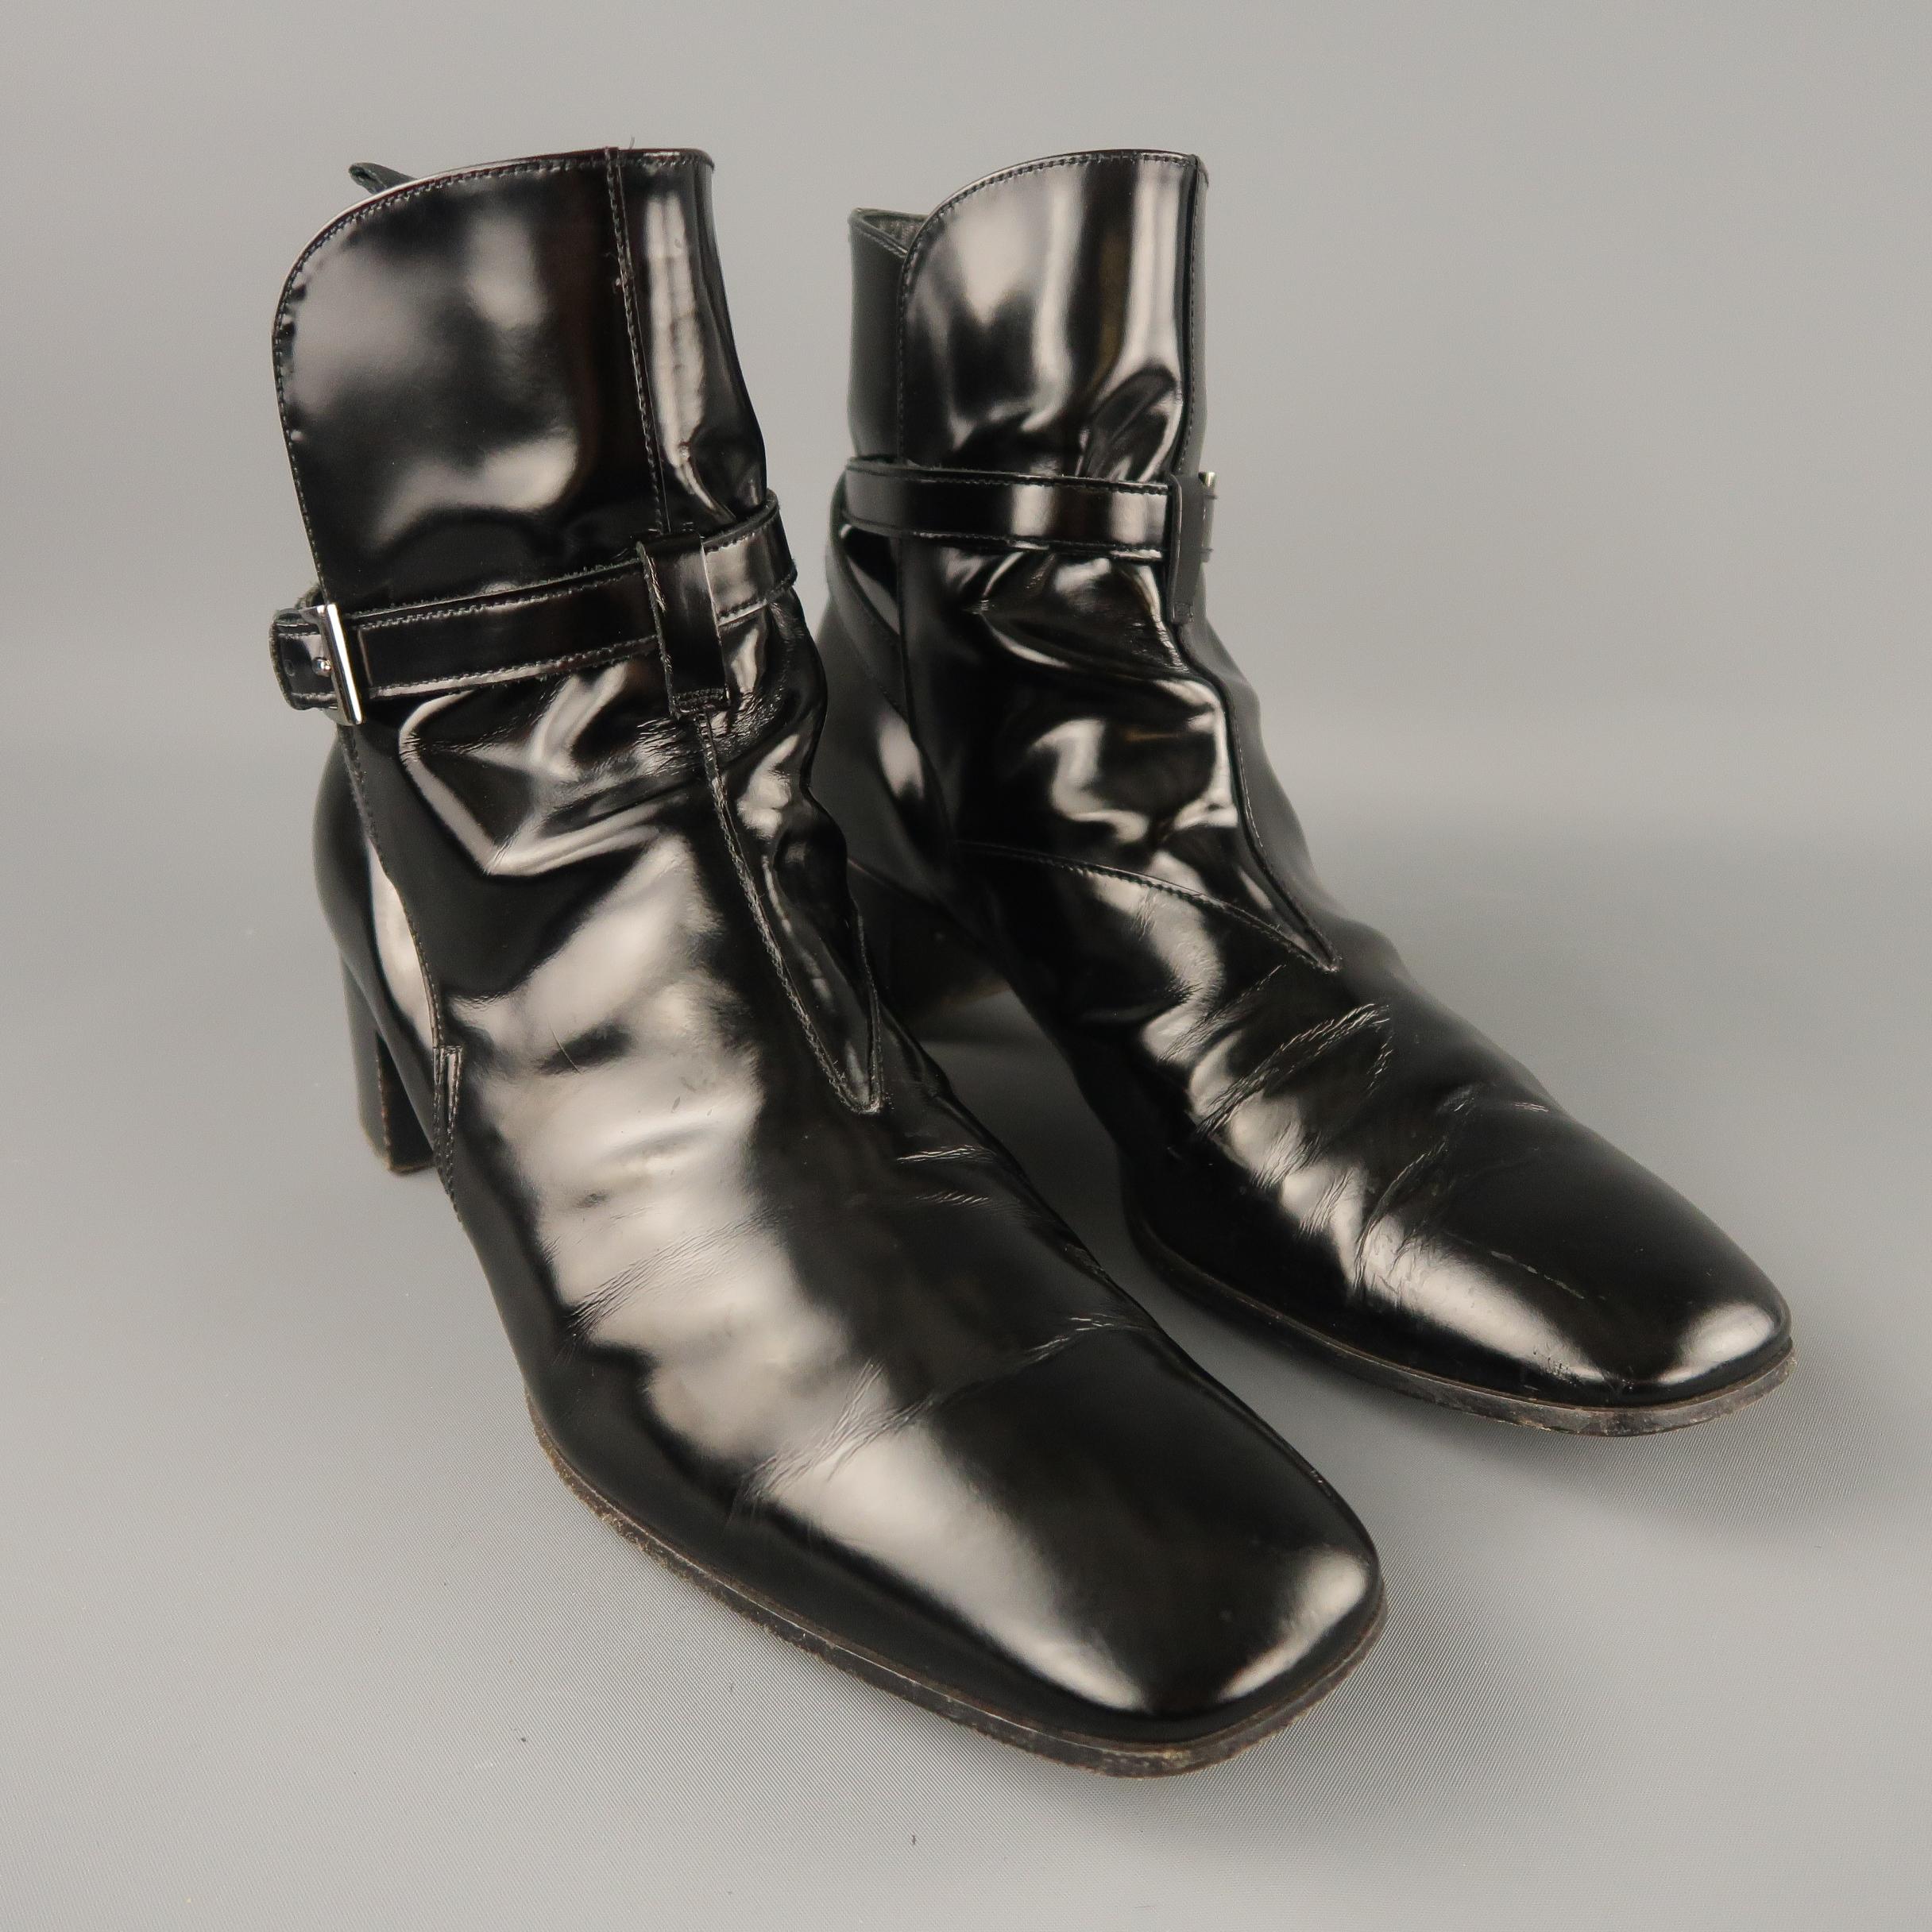 PRADA ankle boots comes in a black leather, wrap around strap details, and wooden heel. Made in Italy.
 
Excellent Pre-Owned Condition.
Marked: UK 8.5
 
Measurements:
 
Length: 12 in.
Width: 4.2 in.
Height: 8 in.